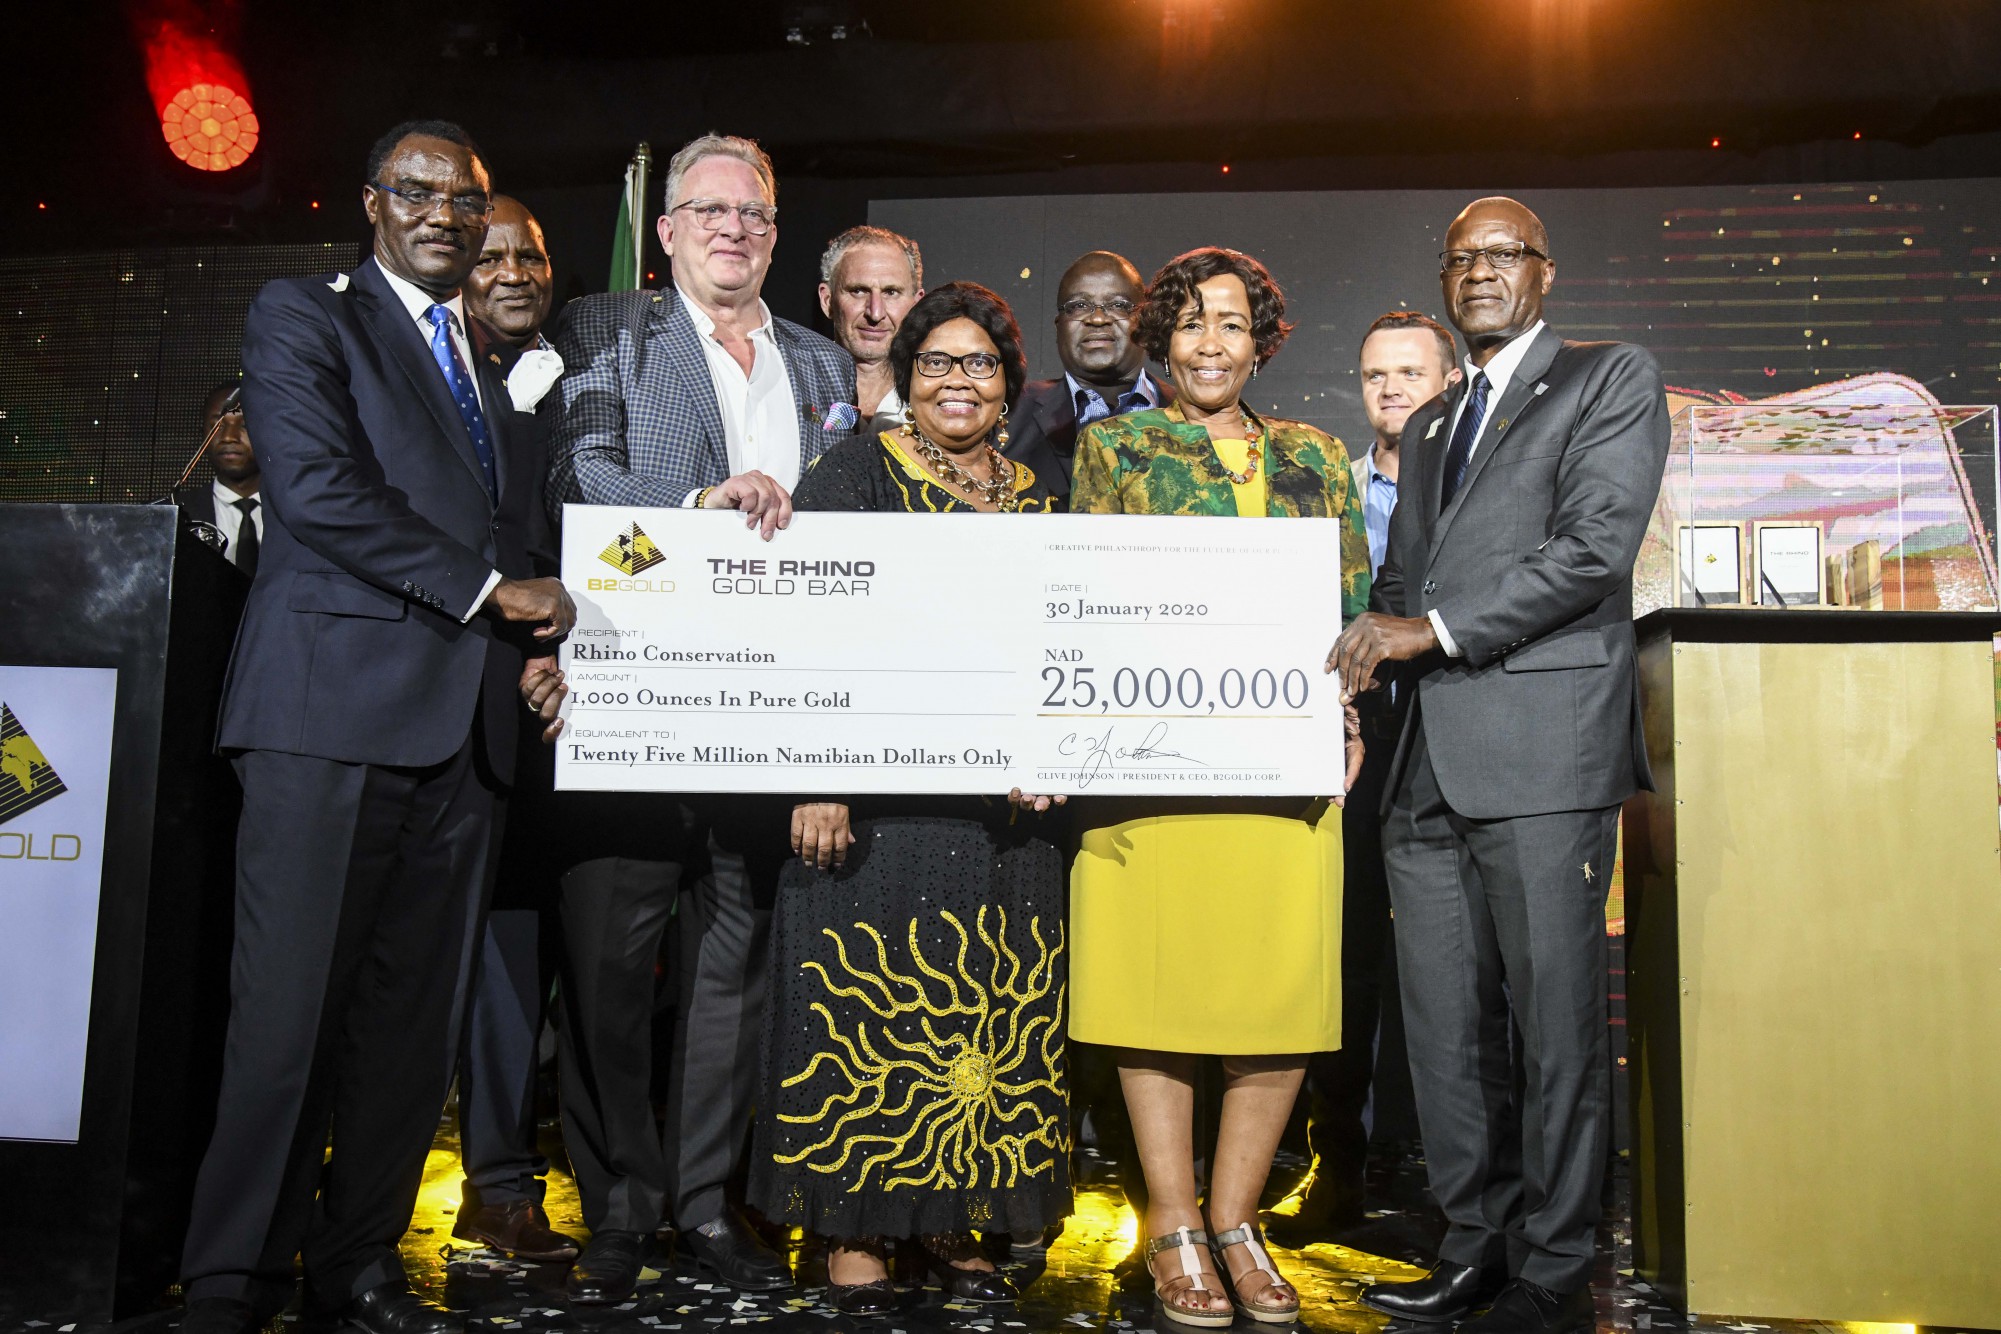 Front (left to right): Dr. Leake Hangala ( Director, B2Gold Namibia Proprietary Limited), Clive Johnson (President, CEO &amp; Director, B2Gold Corp.), Honorable Bernadette Jagger (Deputy Minister of Environment and Tourism), Inge Zaamwani-Kamwi (Adviser to the President of the Republic of Namibia, Dr Hage Geingob) and Tom Alweendo (Minister of Mines and Energy) Back (left to right): Simson Uri-Khob (CEO, Save the Rhino Trust), Mark Dawe (Country Manager and Managing Director &ndash; Namibia, B2Gold Corp.), John Kasaona (Executive Director, Integrated Rural Development and Nature Conservation), and John Roos (Reporting &amp; Projects- Manager, B2Gold Corp.)